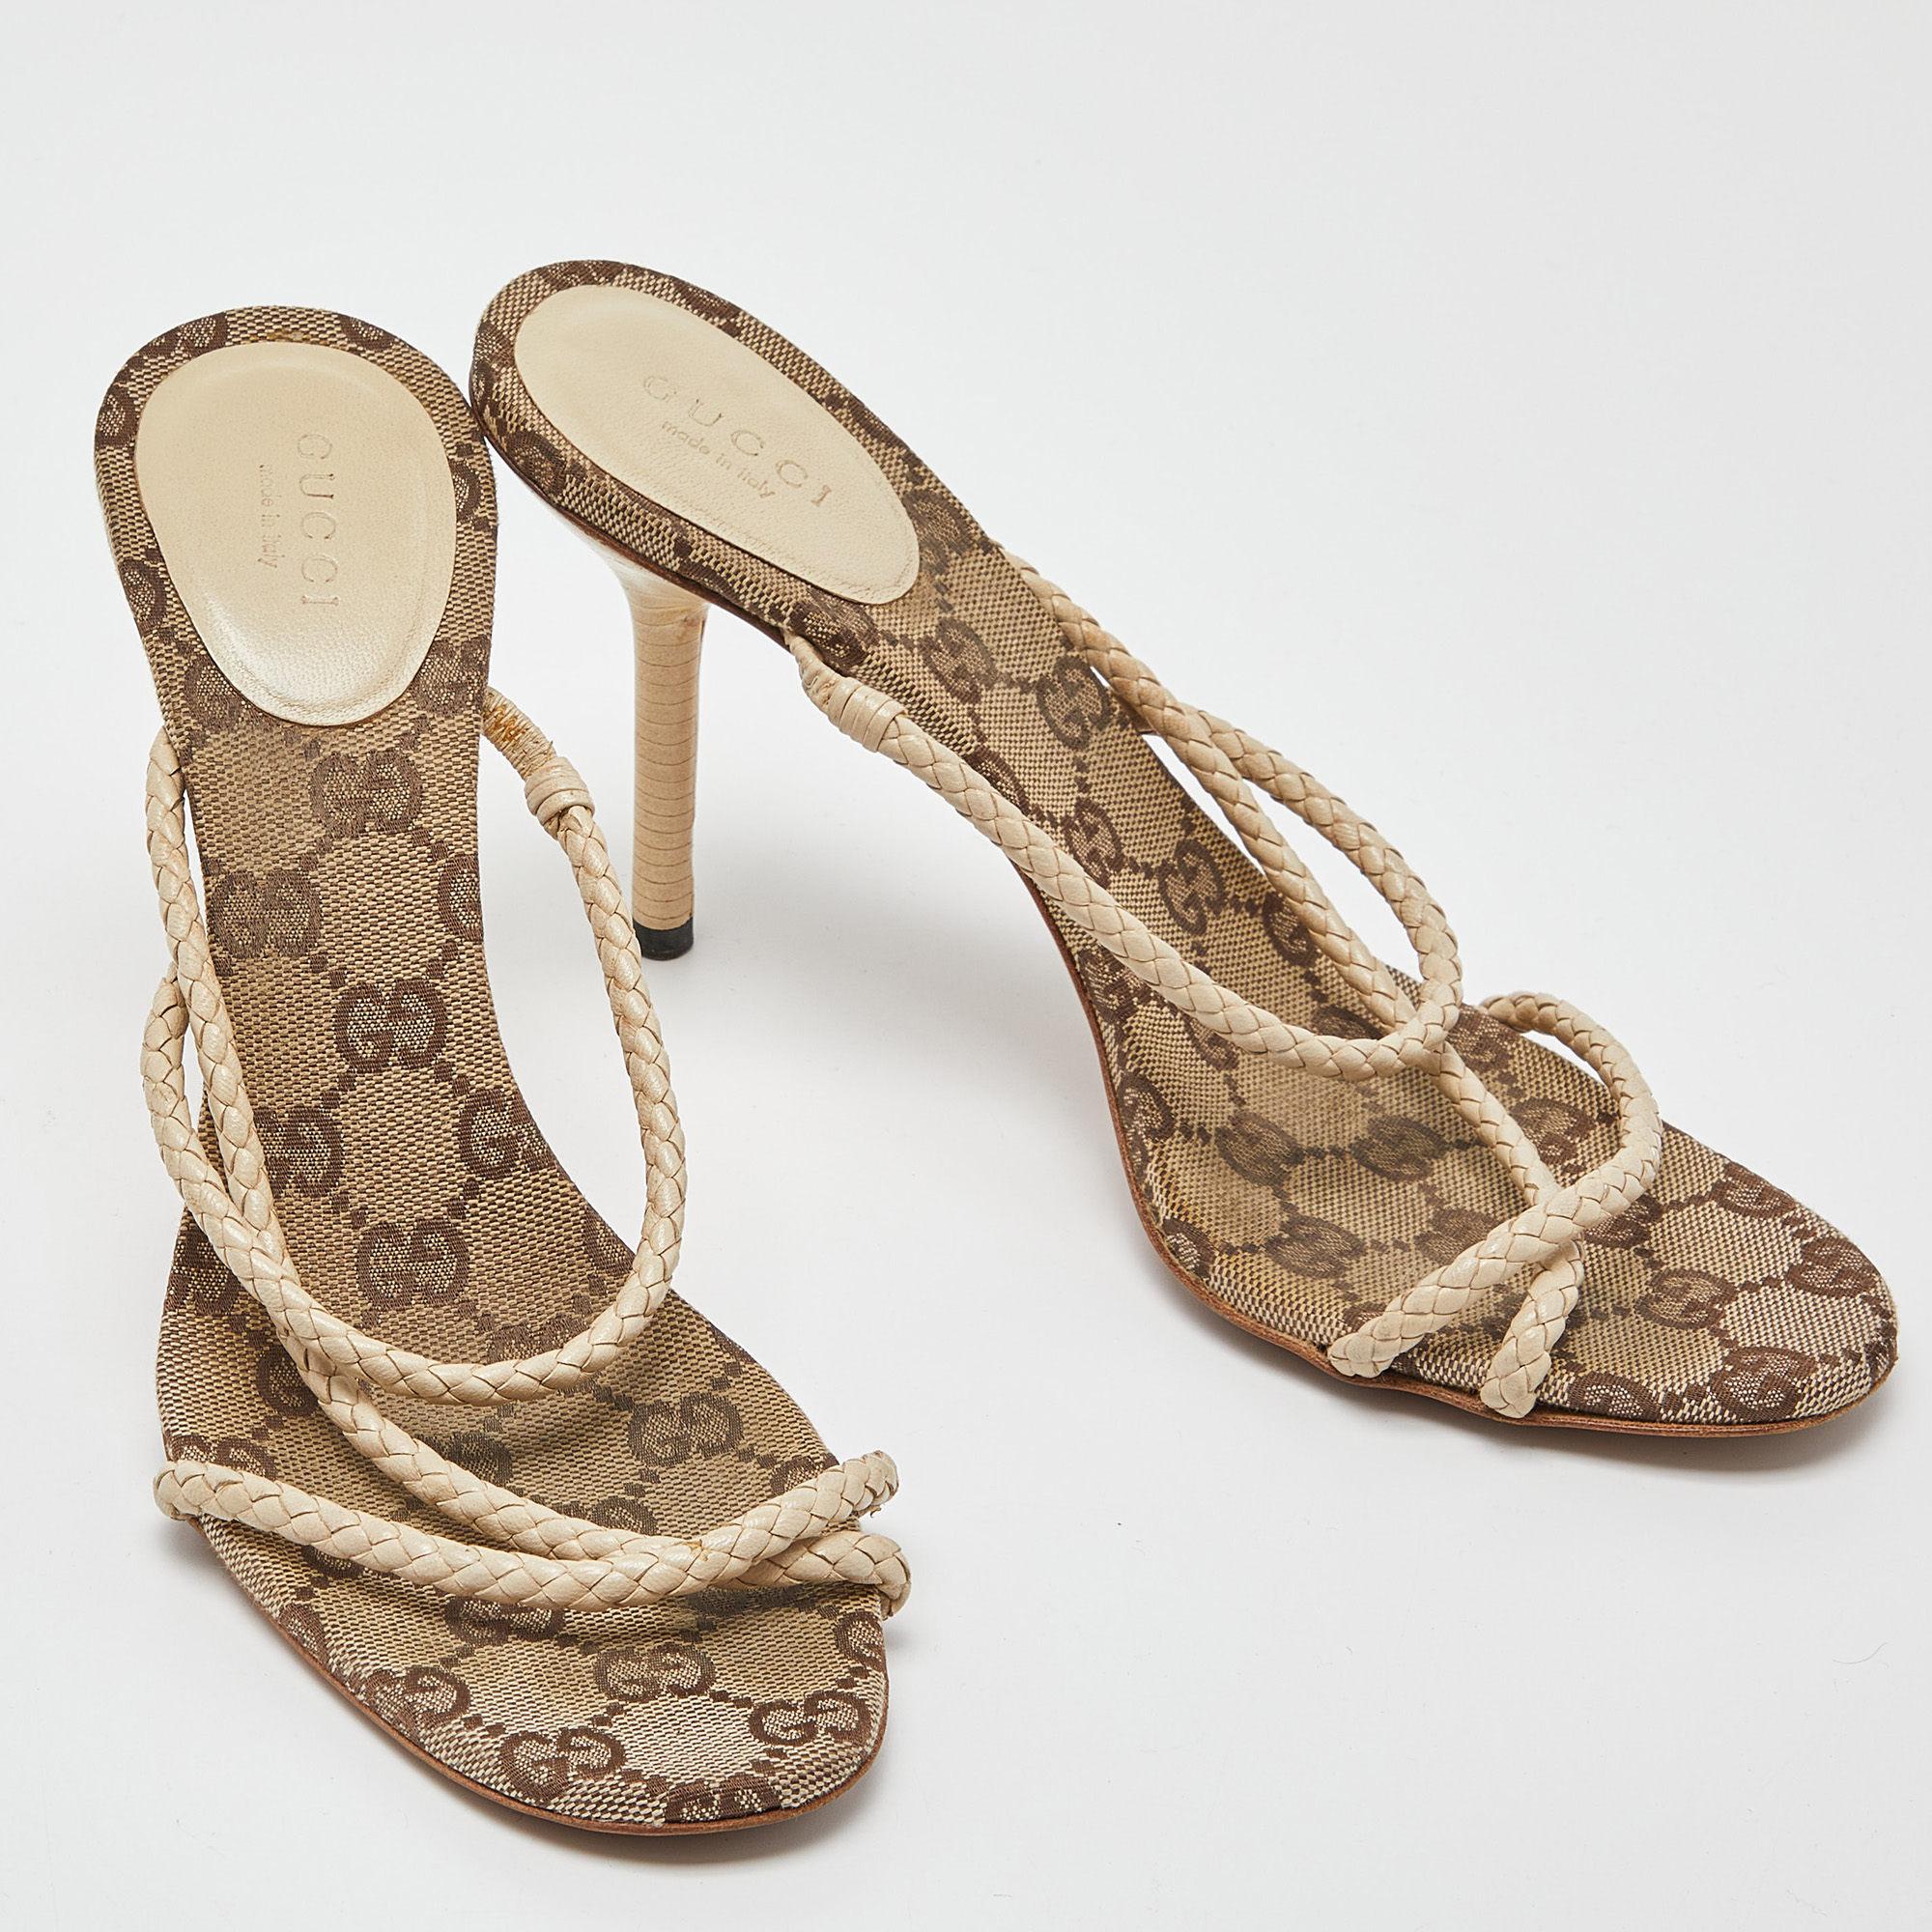 Gucci Cream Braided Leather Cross Strap Slide Sandals Size 38.5